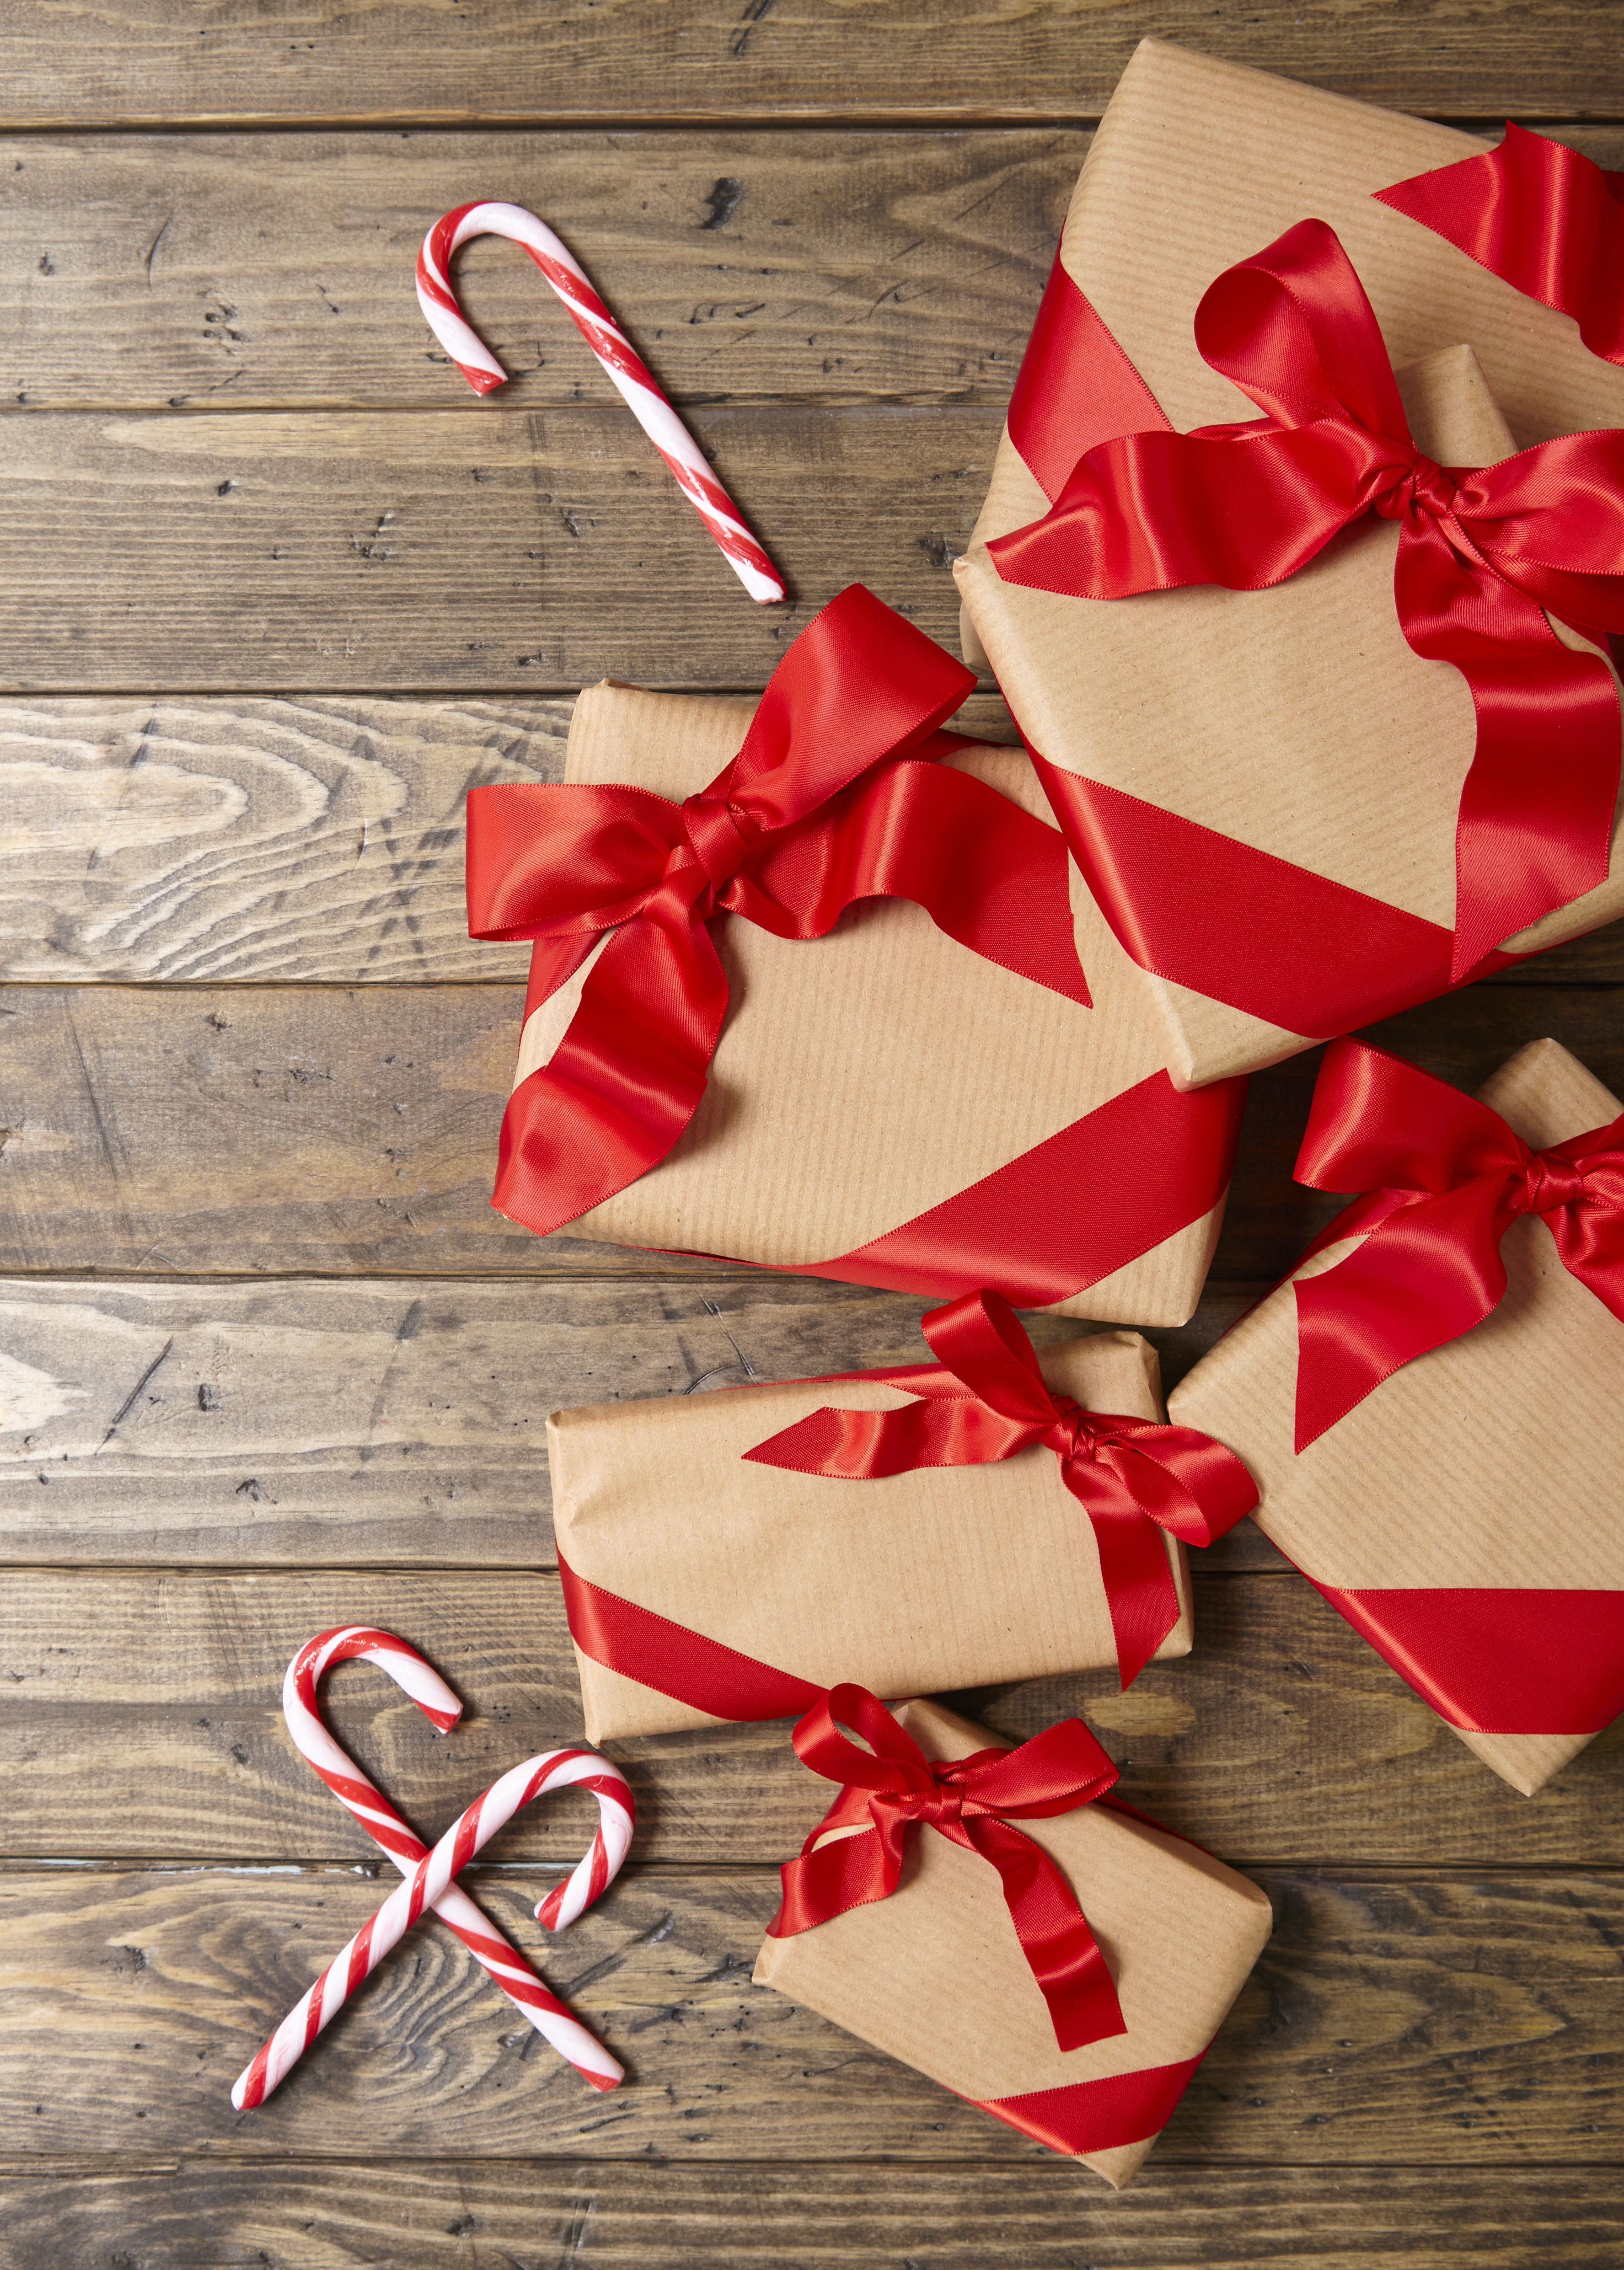 Packages wrapped in brown paper and red ribbons and candy canes on a wooden background.